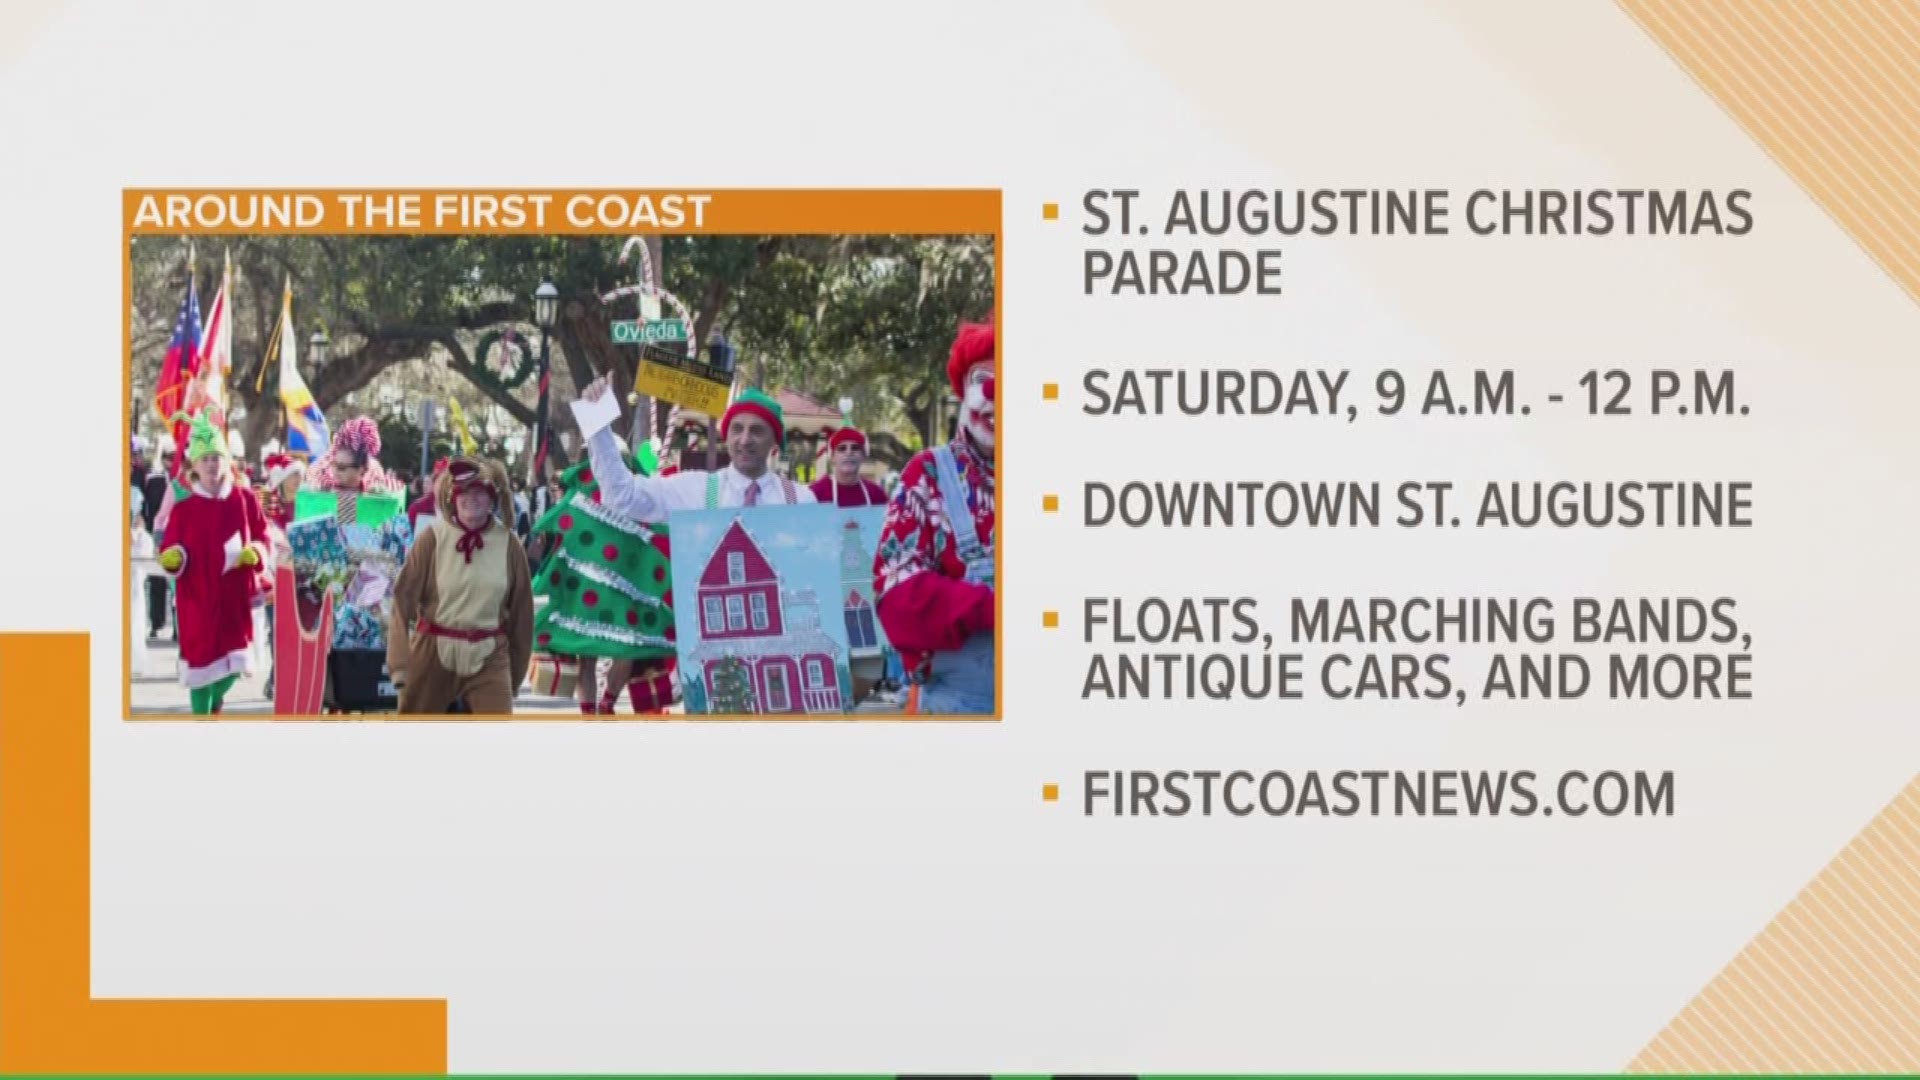 There are so many events happening this weekend on the First Coast. Here are some of our favorites.